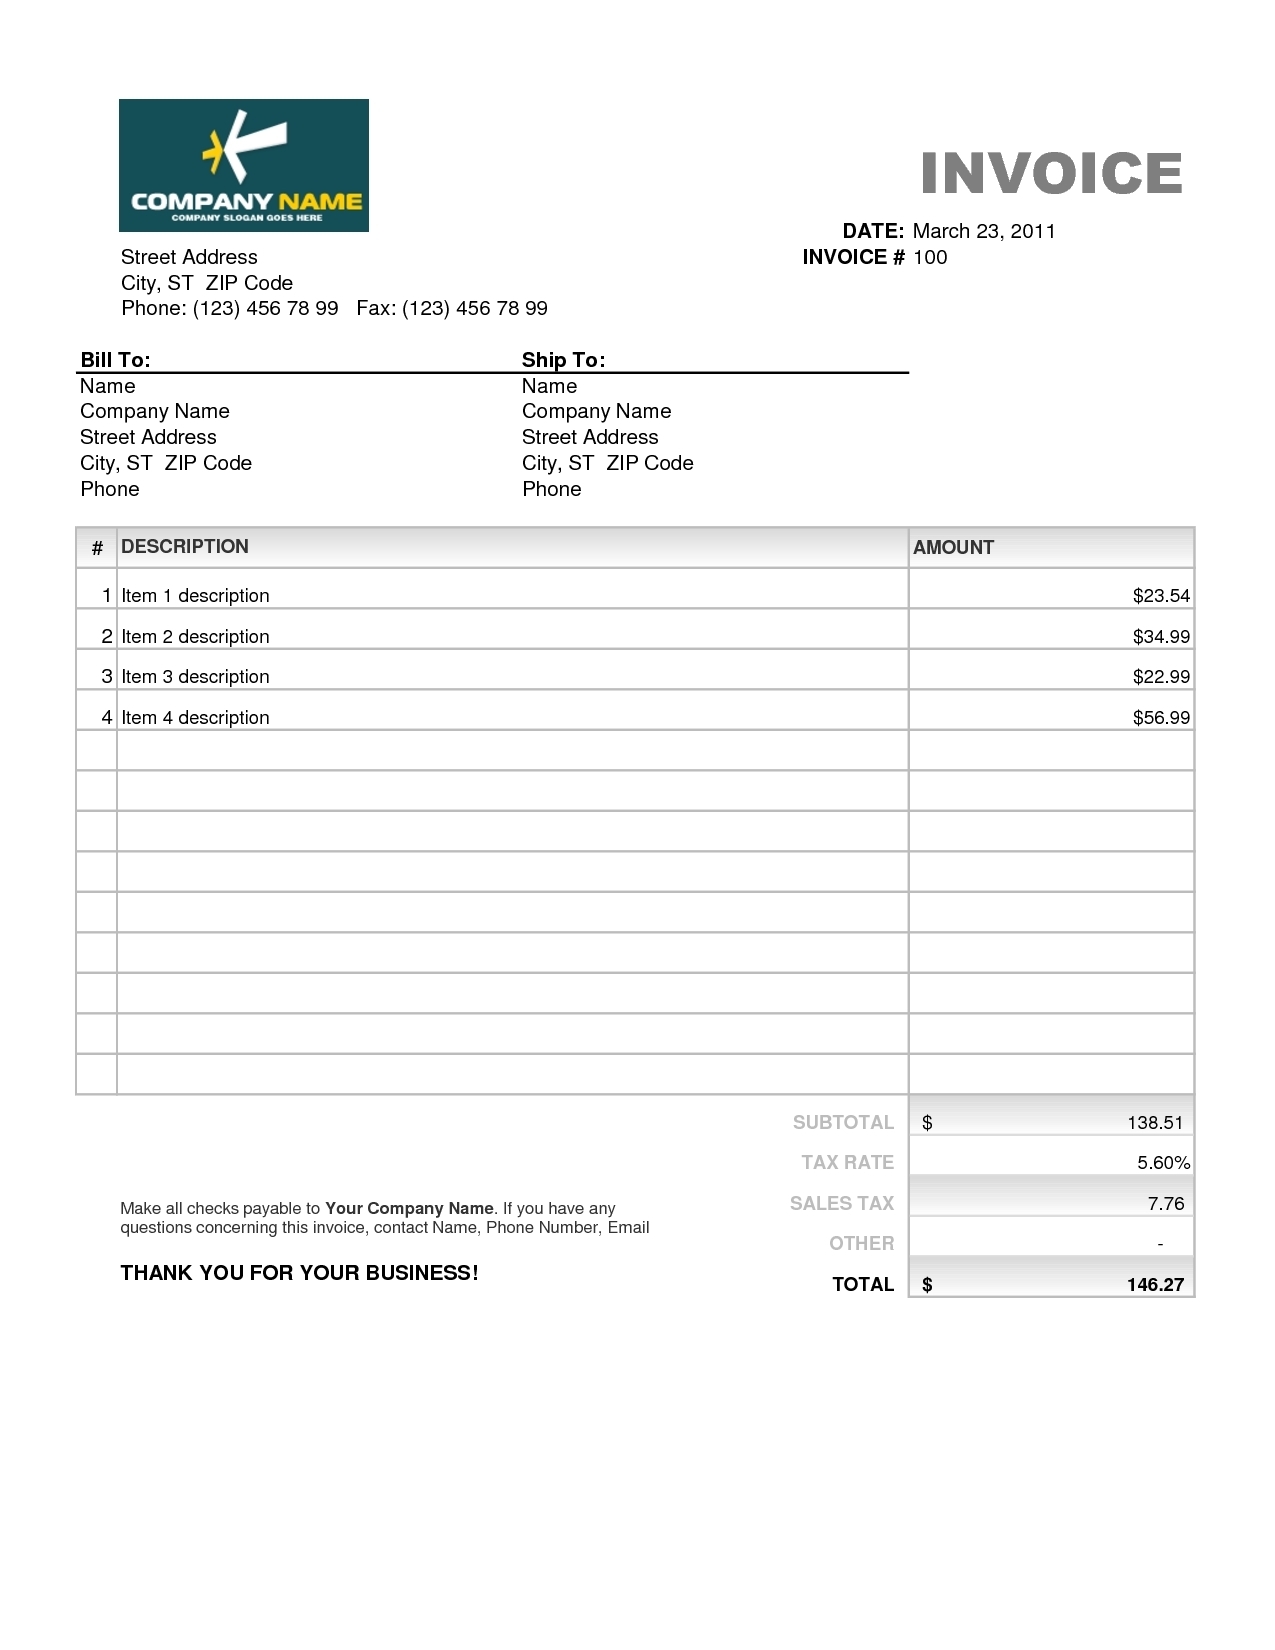 invoice excel template free download invoice template free 2016 excel invoice template free download